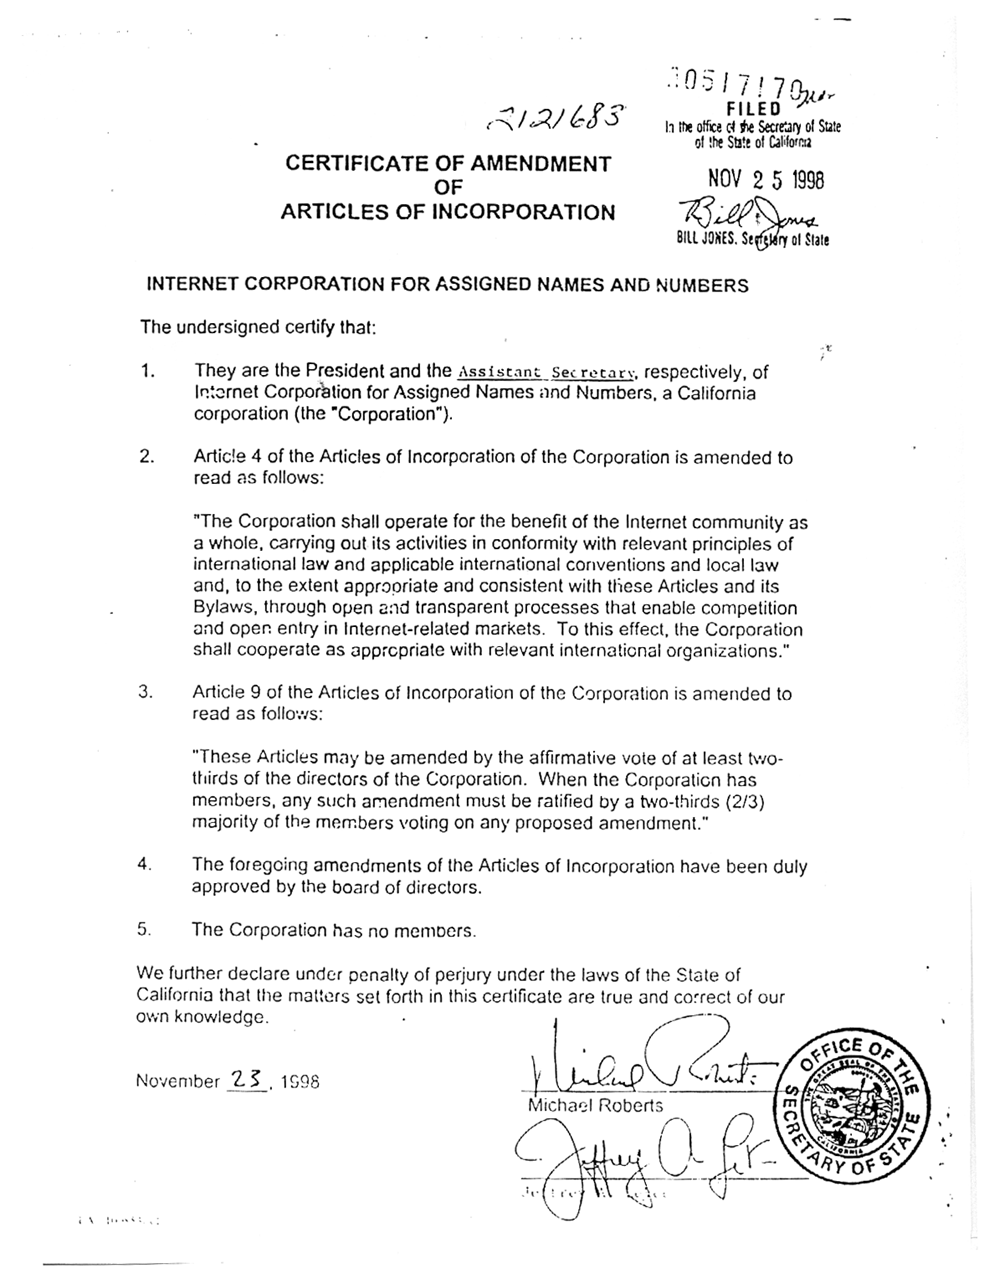 Certificate Of Amendment of Articles of Incorporation